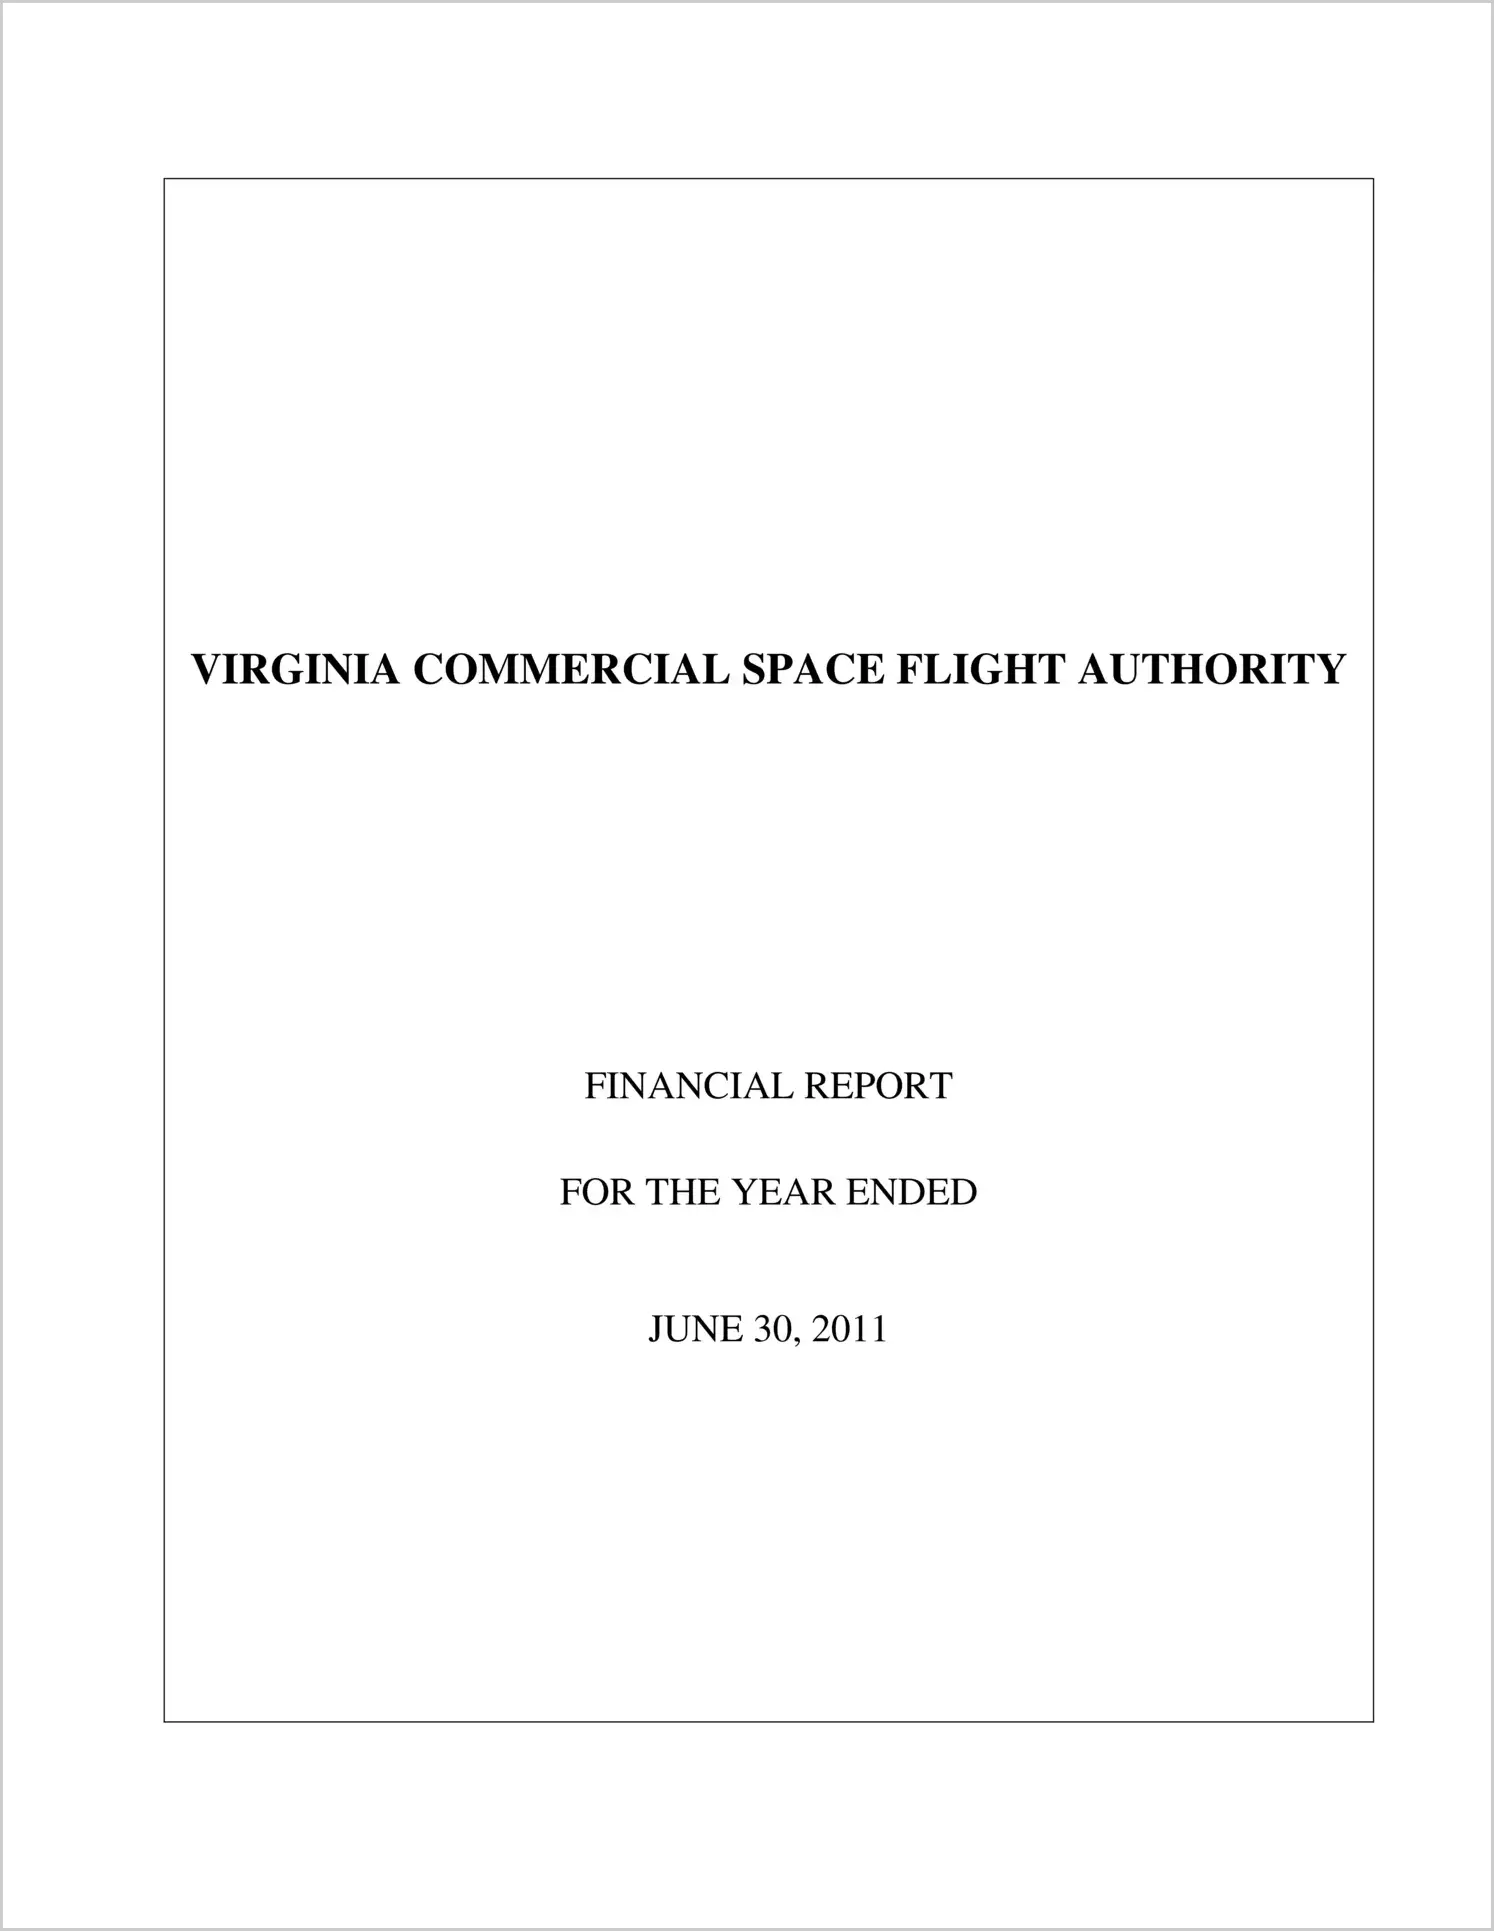 Virginia Commercial Space Flight Authority Financial Statements Report for the year ended June 30, 2011